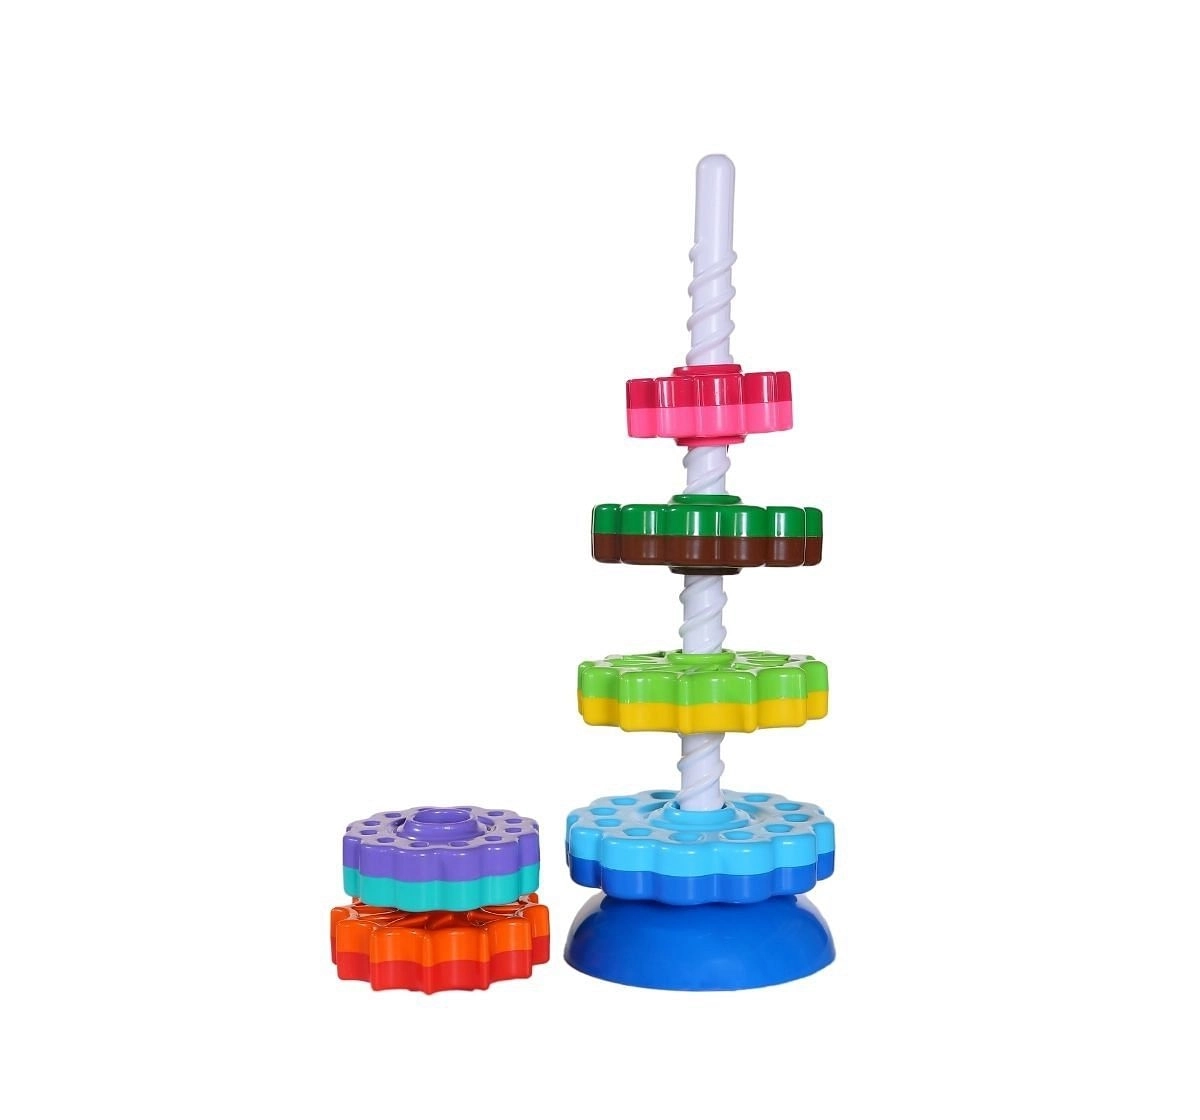 Shooting Star Spinning Tower Multicolour 12M+